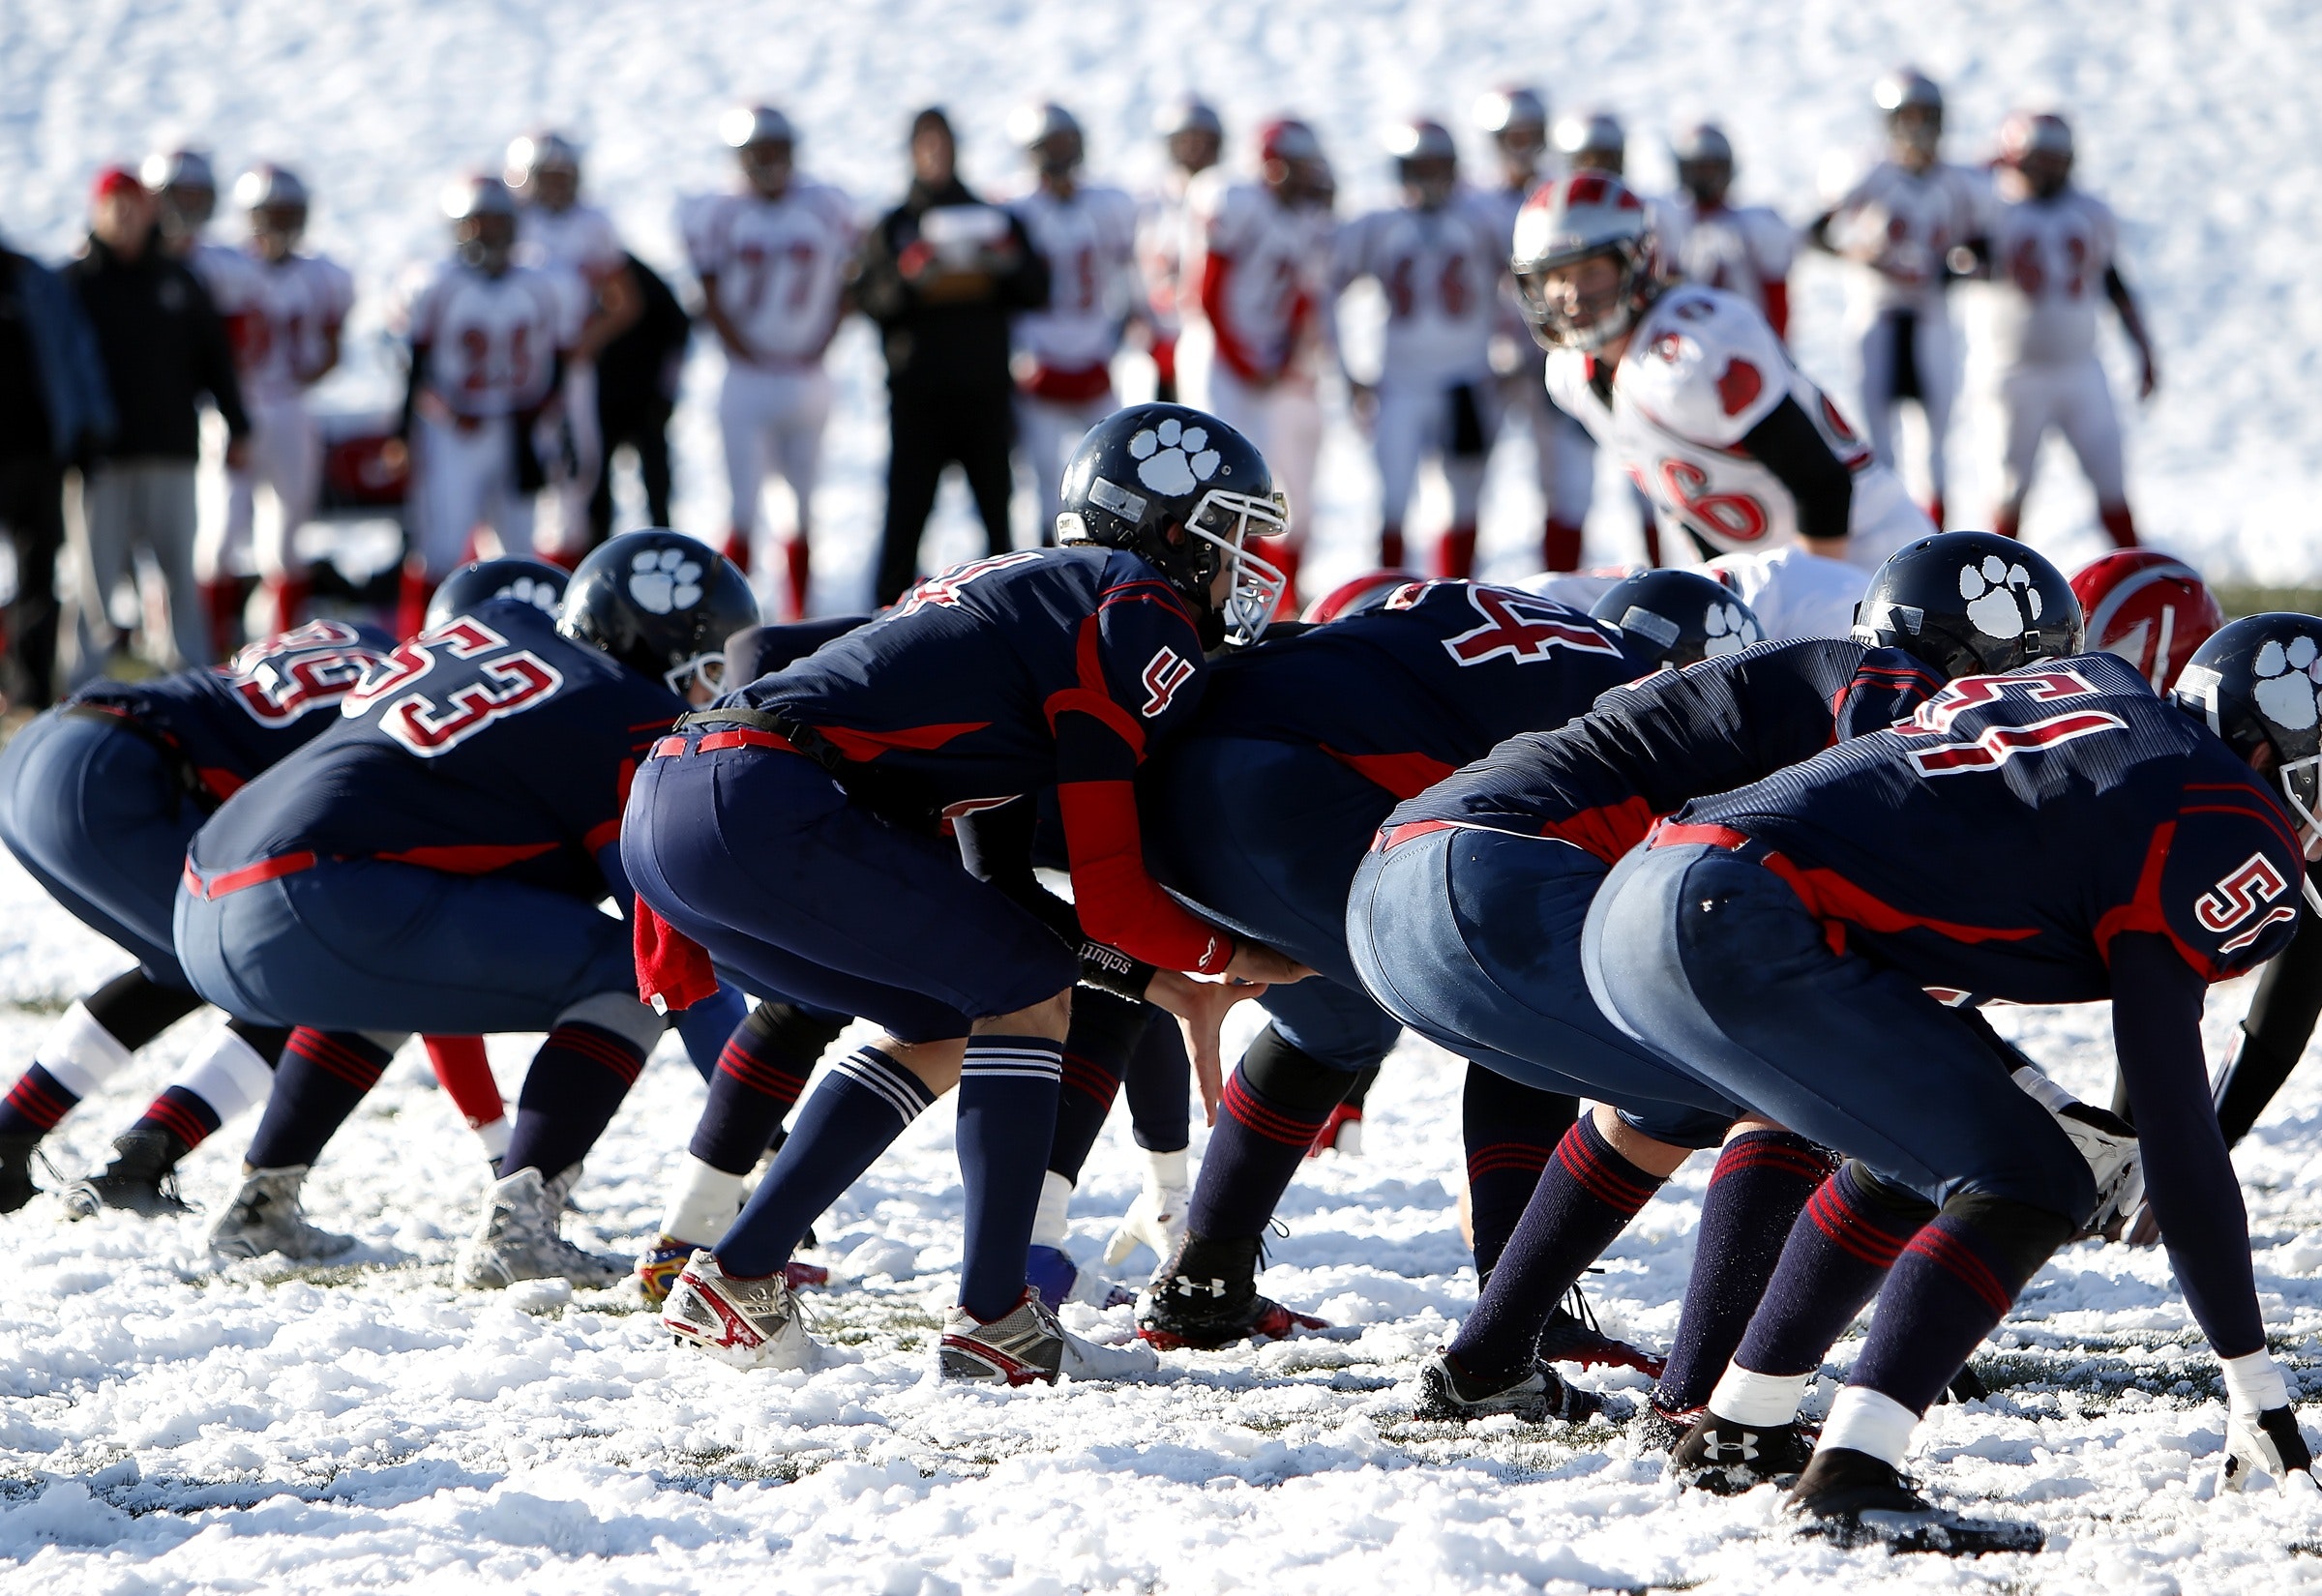 Football team on ice during daytime photo